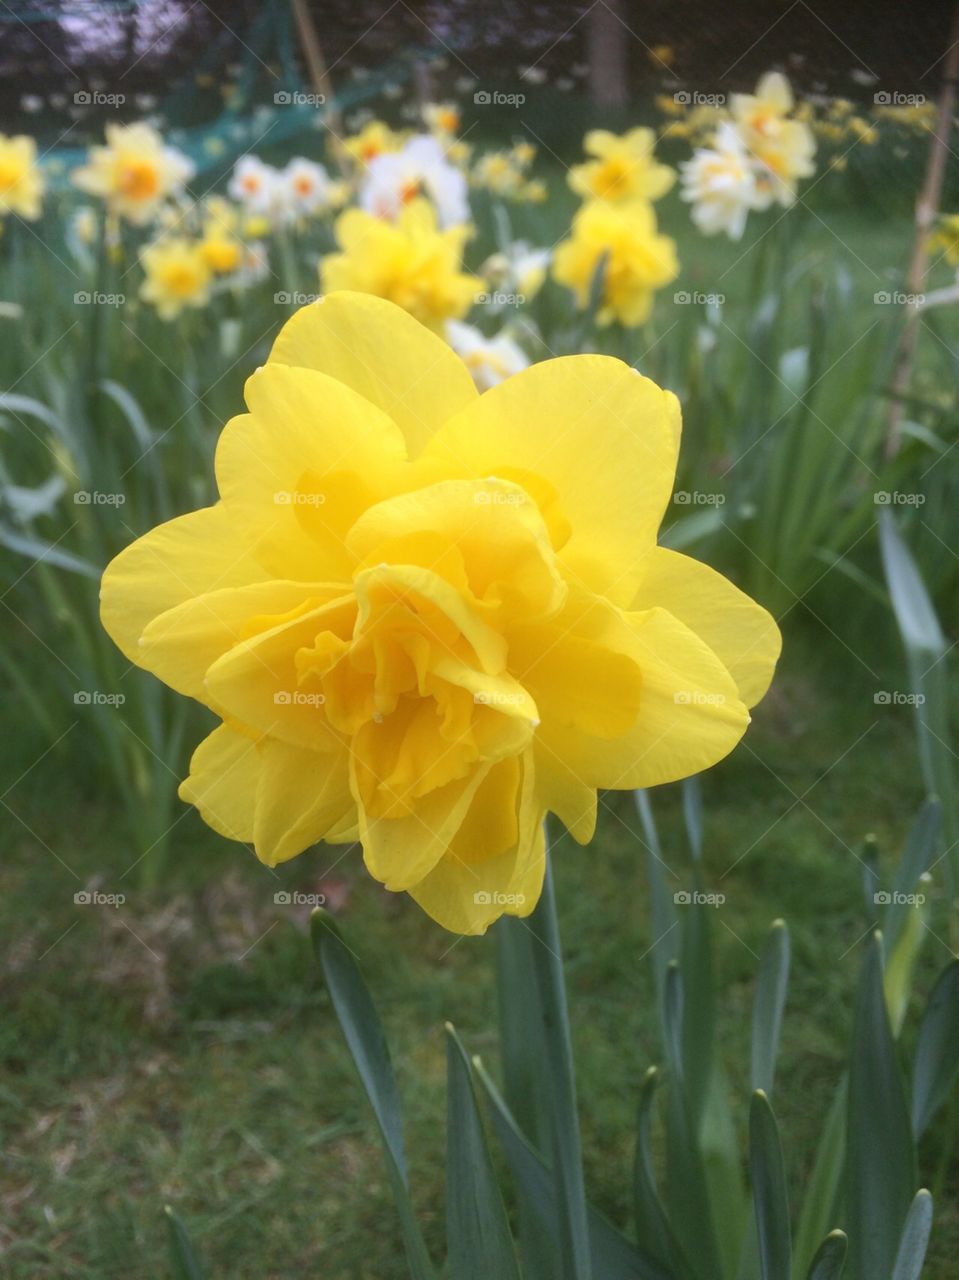 Beautiful yellow double daffodils creating a splash of colour in the spring garden.